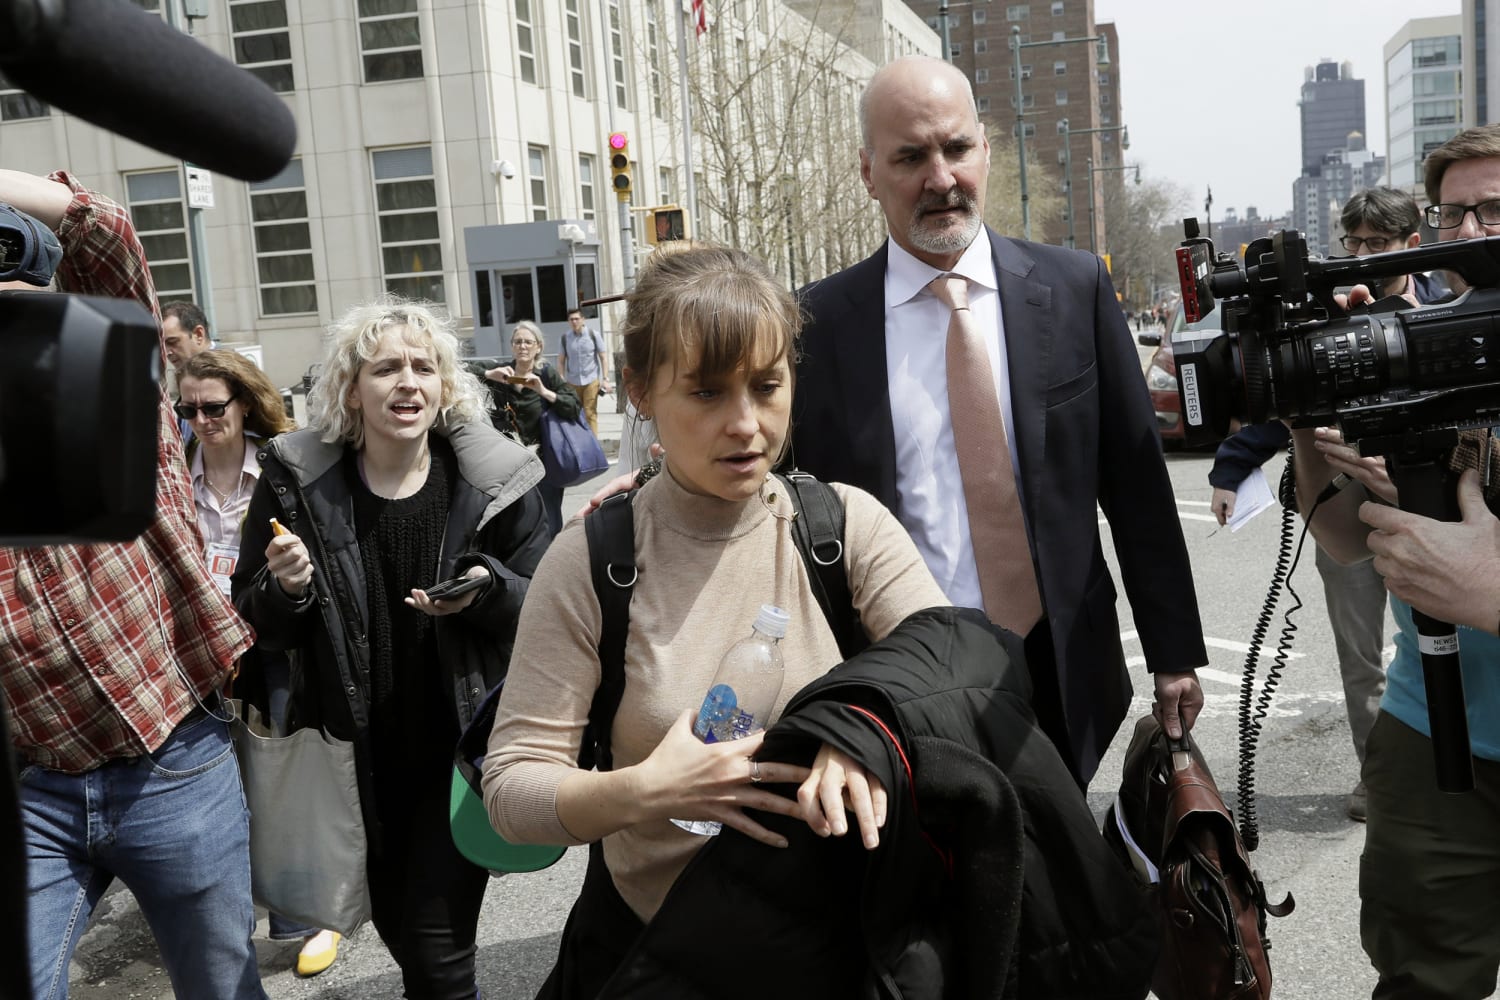 Actress Allison Mack pleads guilty for role in alleged New York sex cult